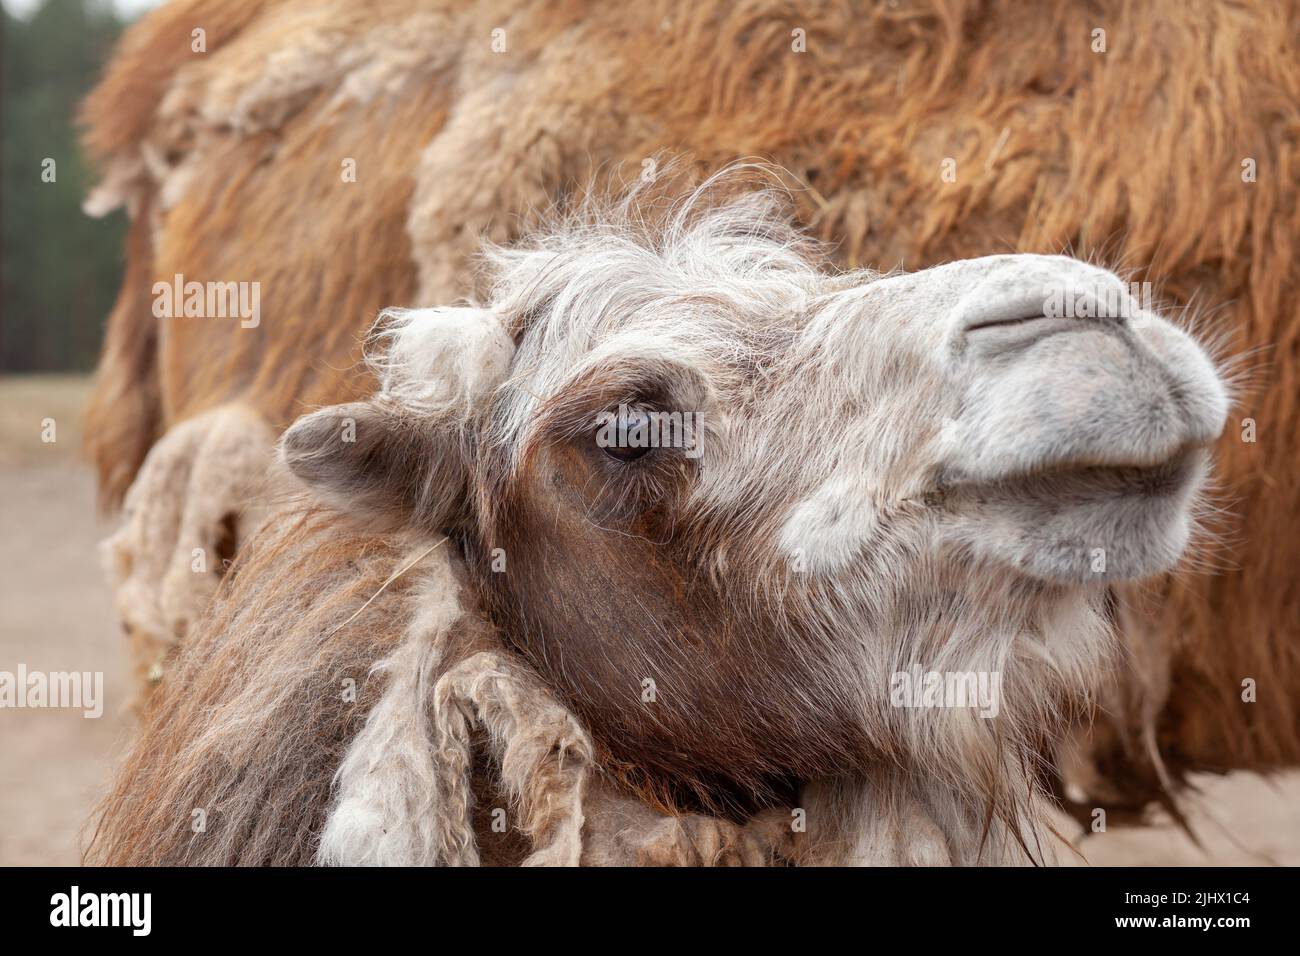 Close-up of a camel's head. Camels at the animal farm. Stock Photo